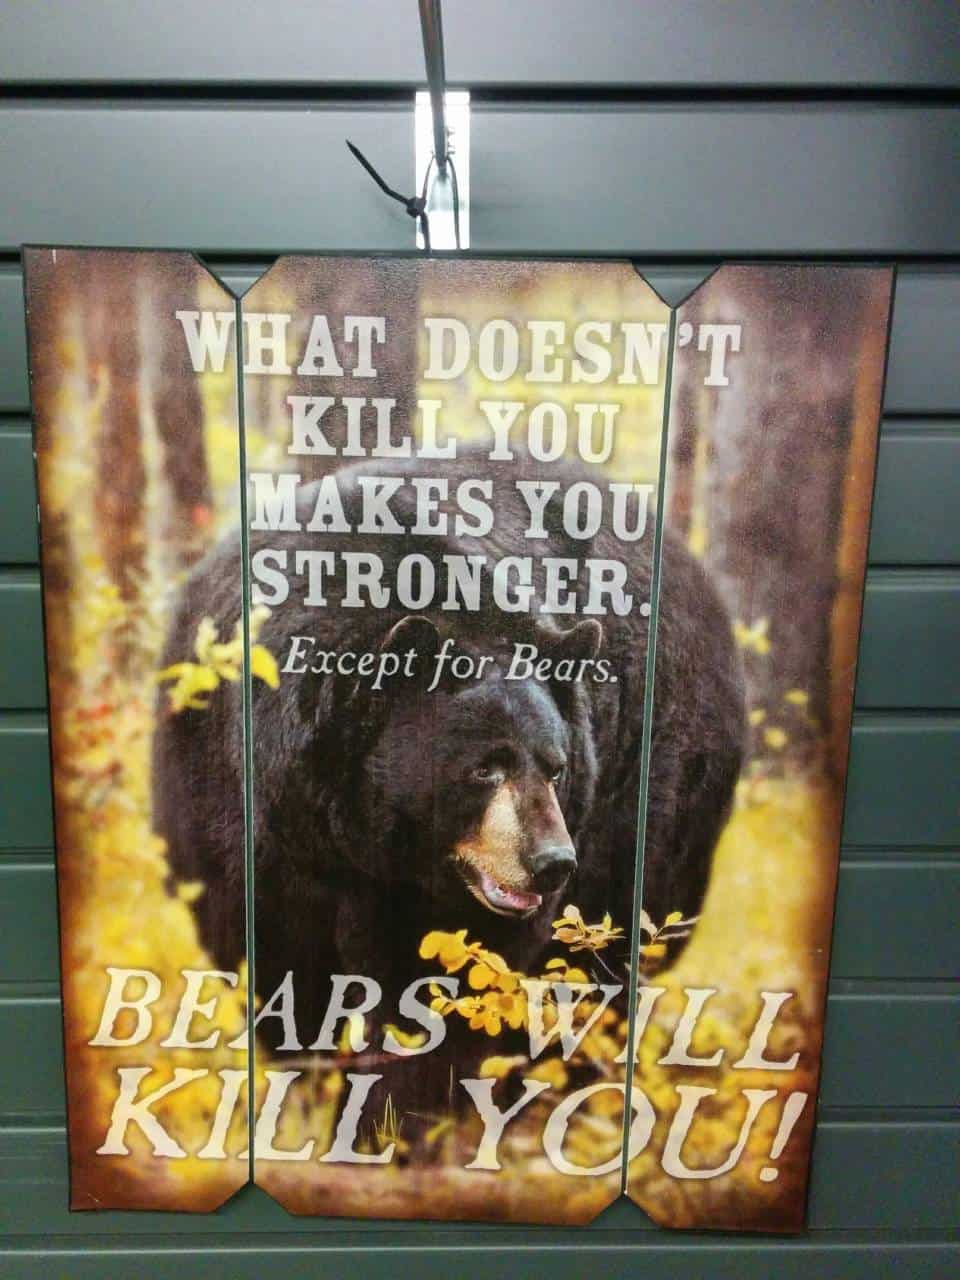 PSA - Make sure to have your bear spray when heading out for your hikes! 